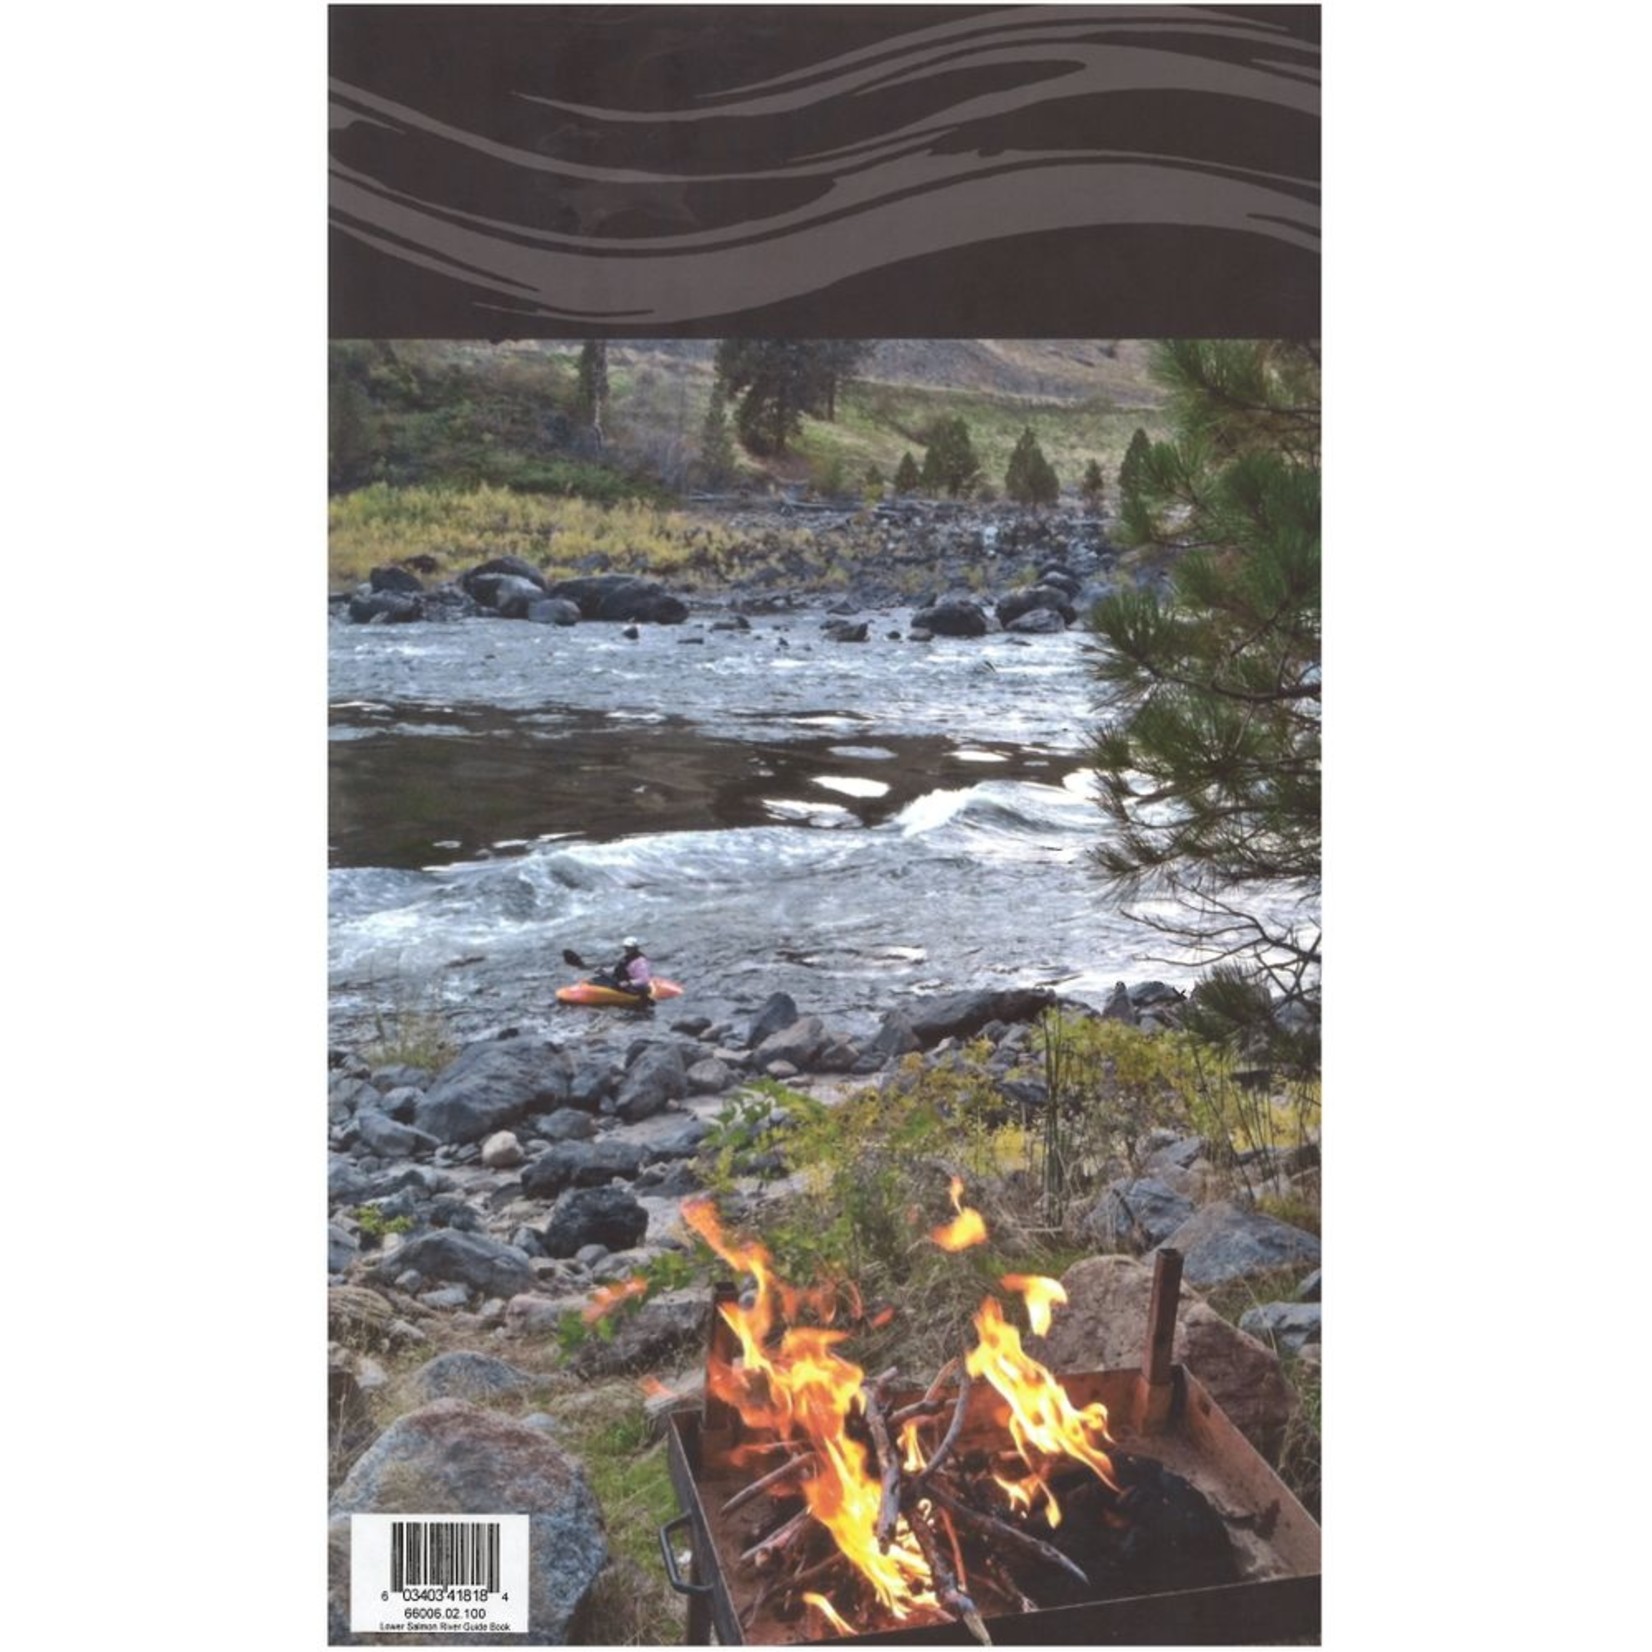 BLM The Lower Salmon River Boating Guide Book